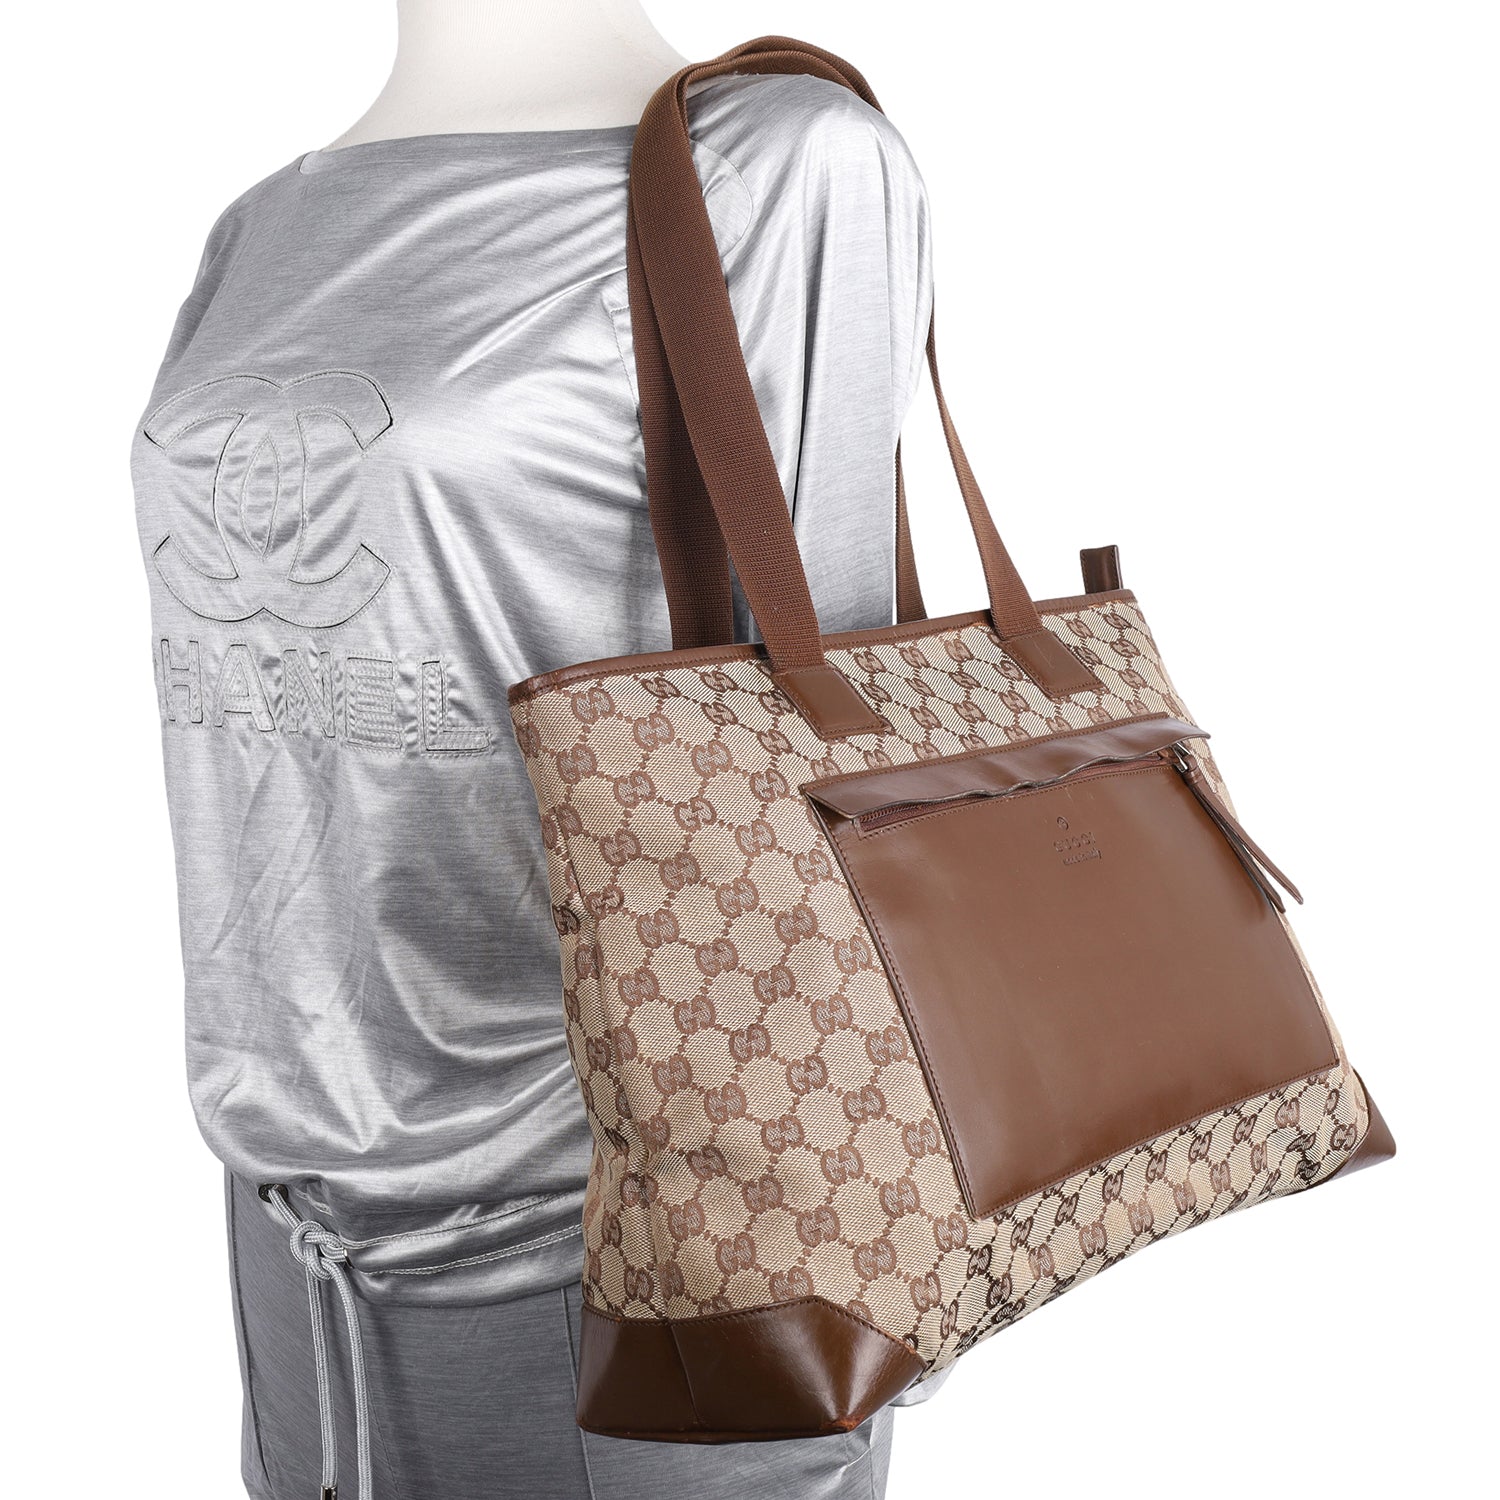 Authentic Gucci Brown GG Canvas Shoulder Tote Bag